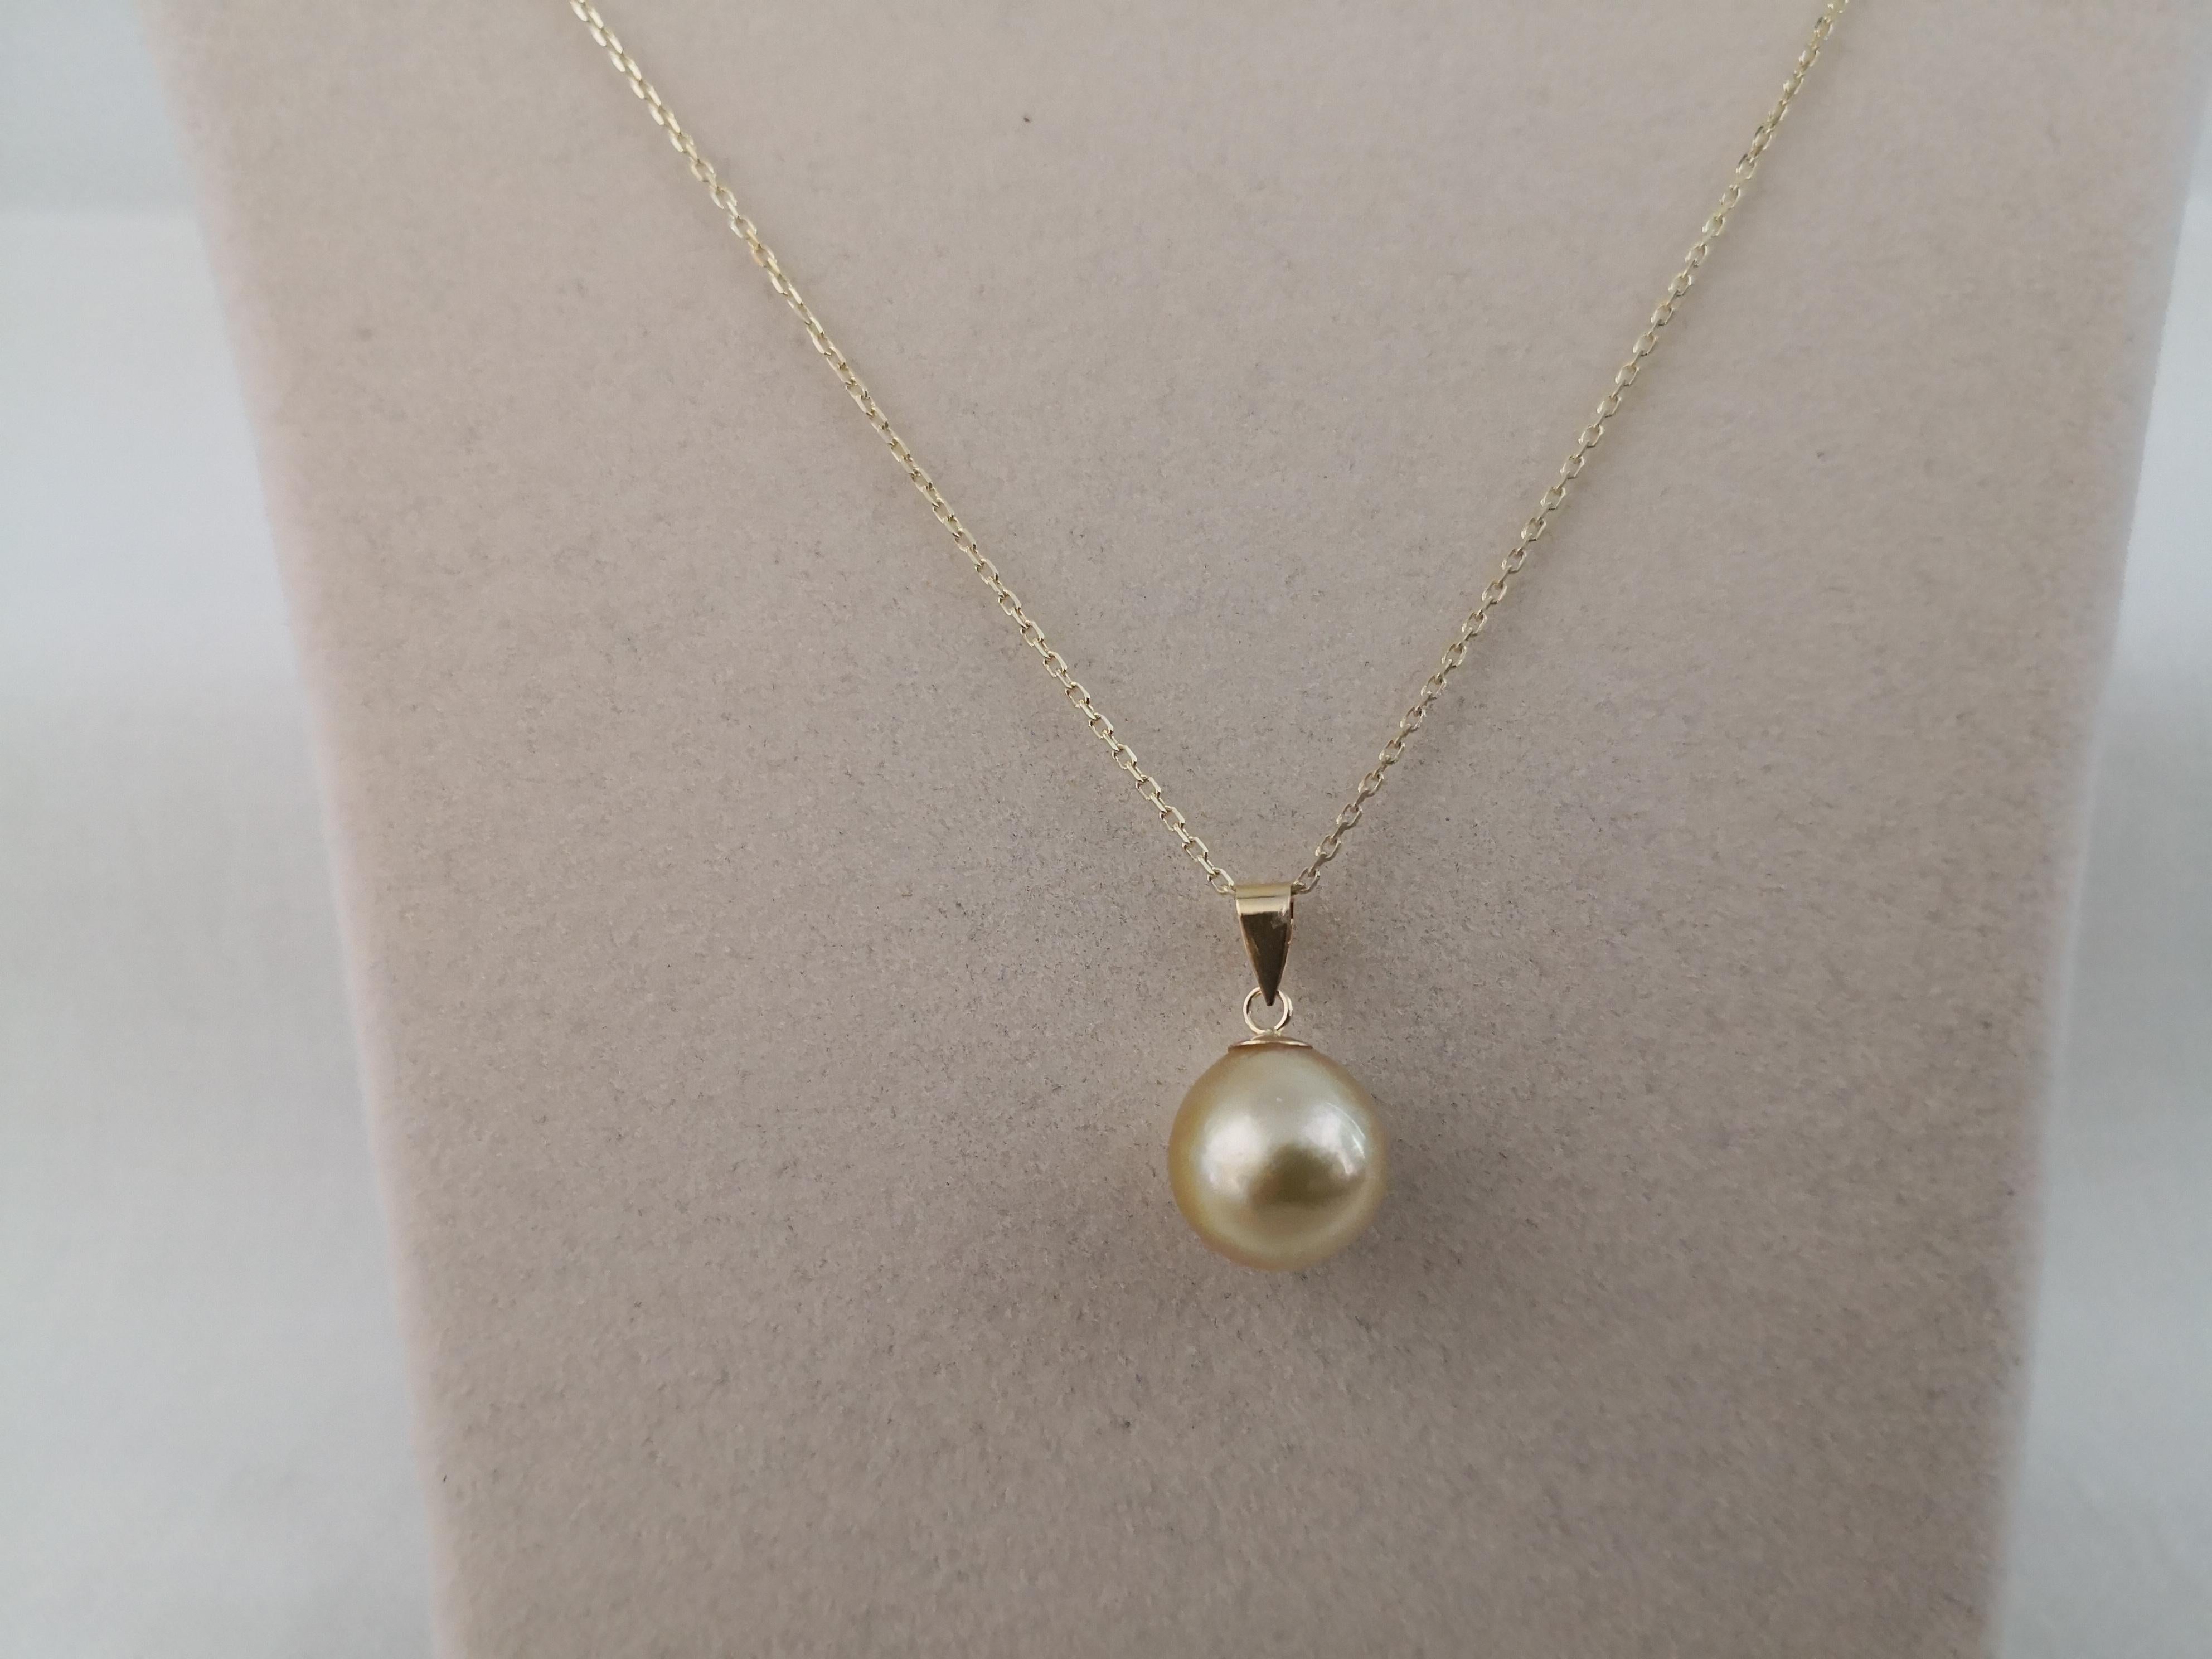 - Natural Color South Sea Pearl Pendant

- Origin: Australian ocean waters

- Produced by Pinctada Maxima Oyster

- 18 karats Yellow Gold mounting

- 40 cm long chain manufactured in 18 karats yellow gold

- Total weight of 5.25 grams

- Size of